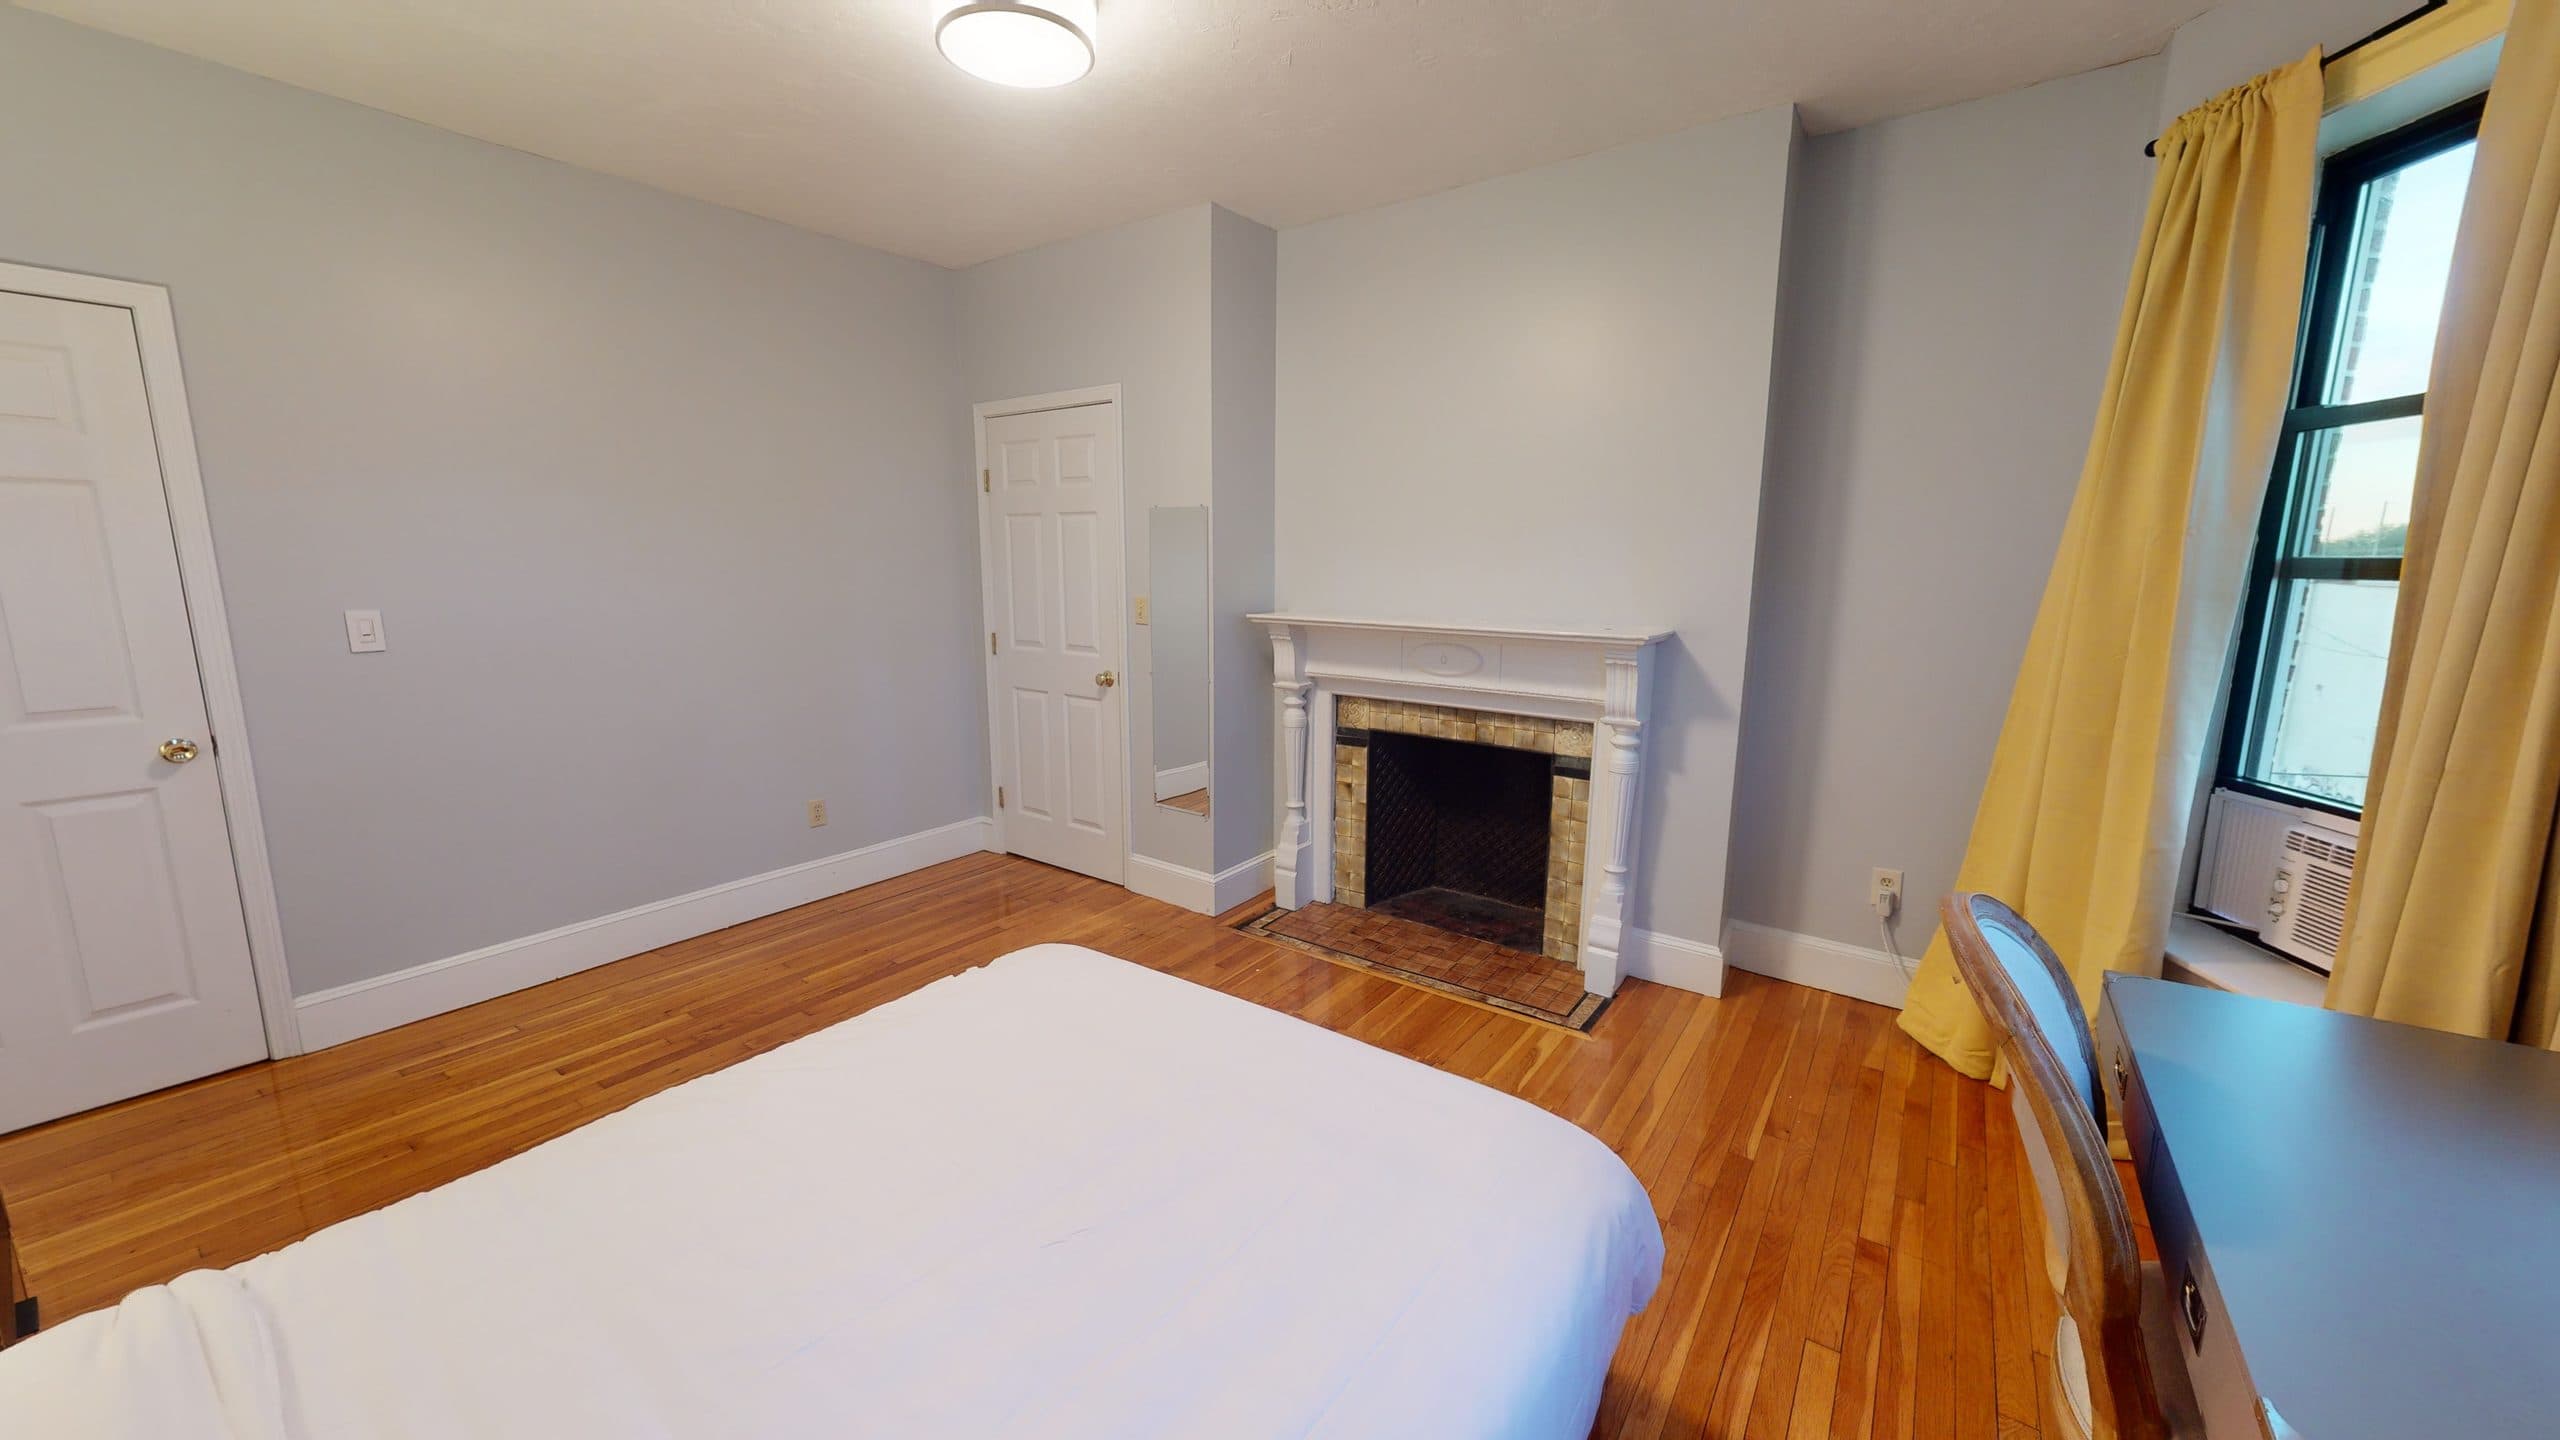 Photo 15 of #1465: Queen Bedroom A at June Homes